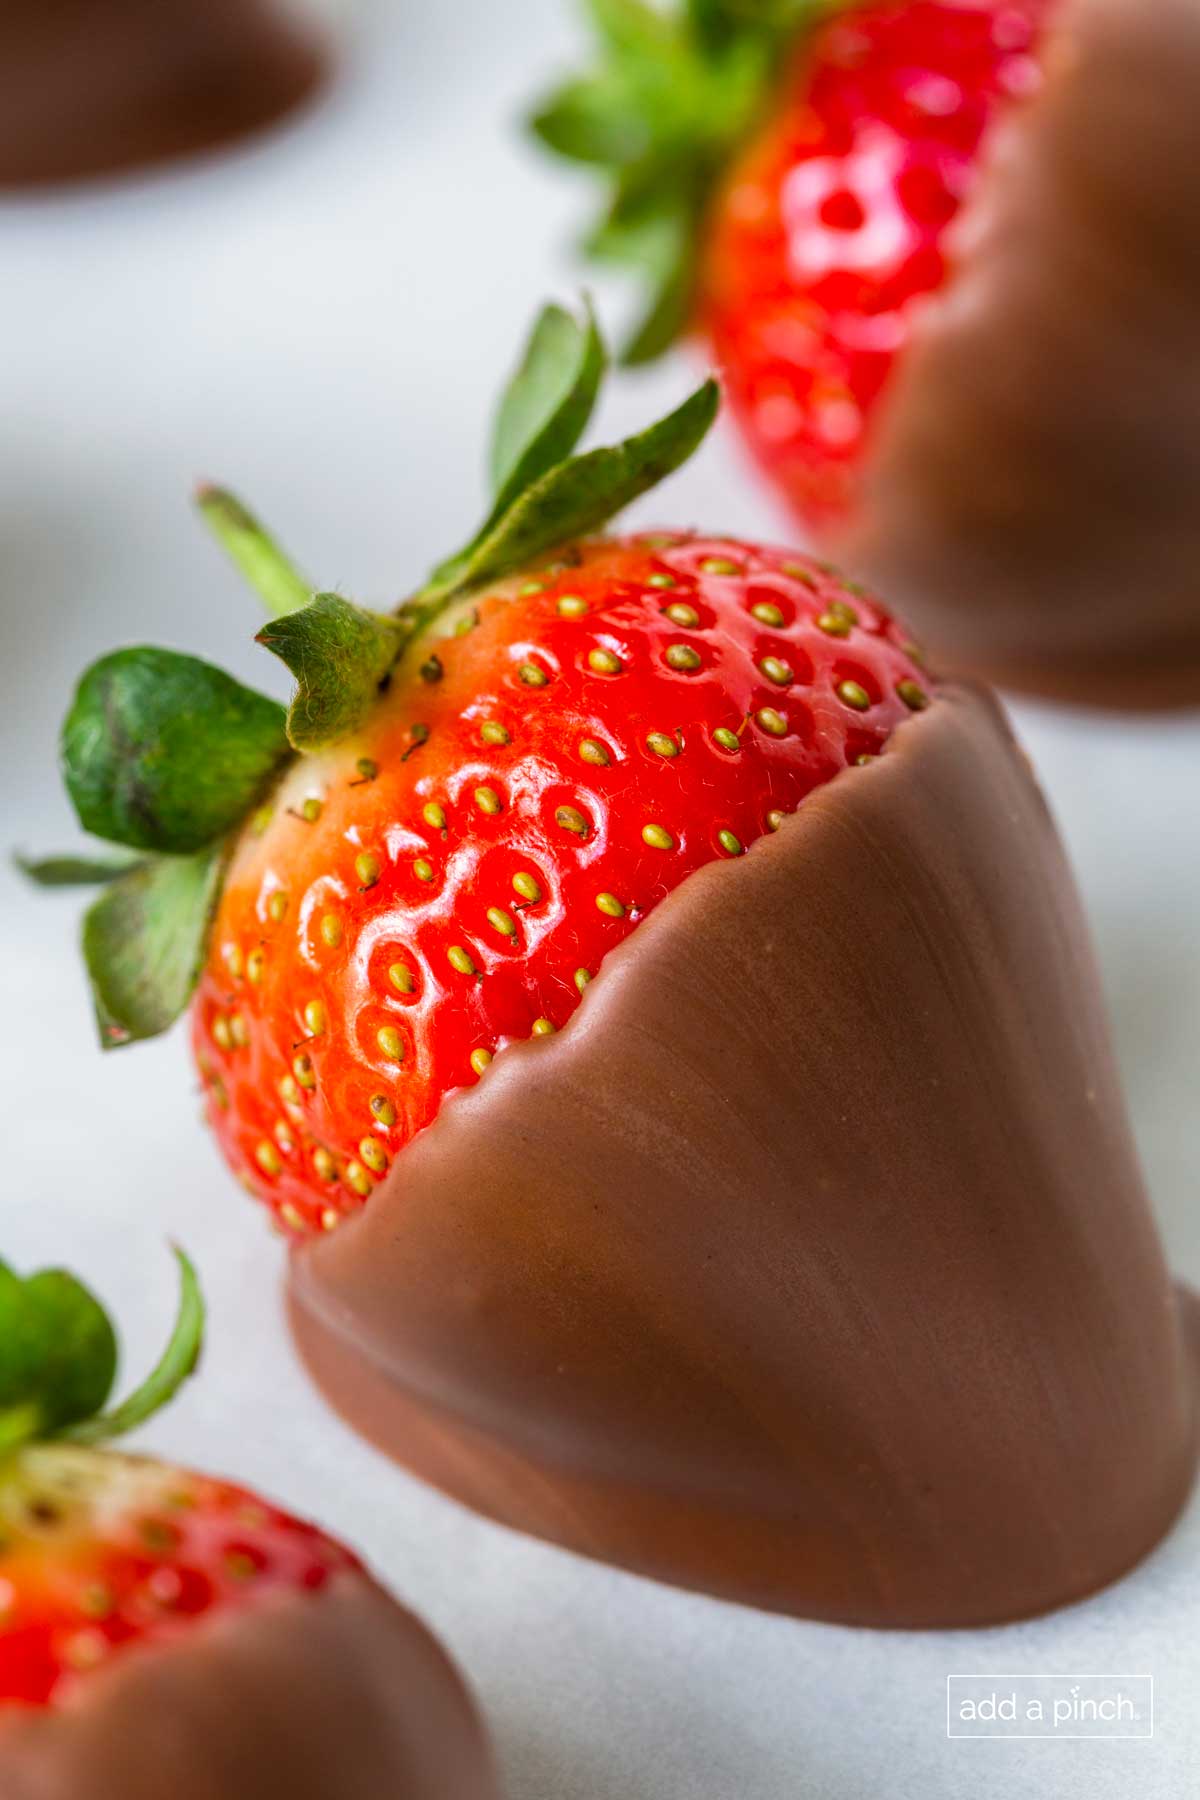 Close photograph of a chocolate covered strawberry.